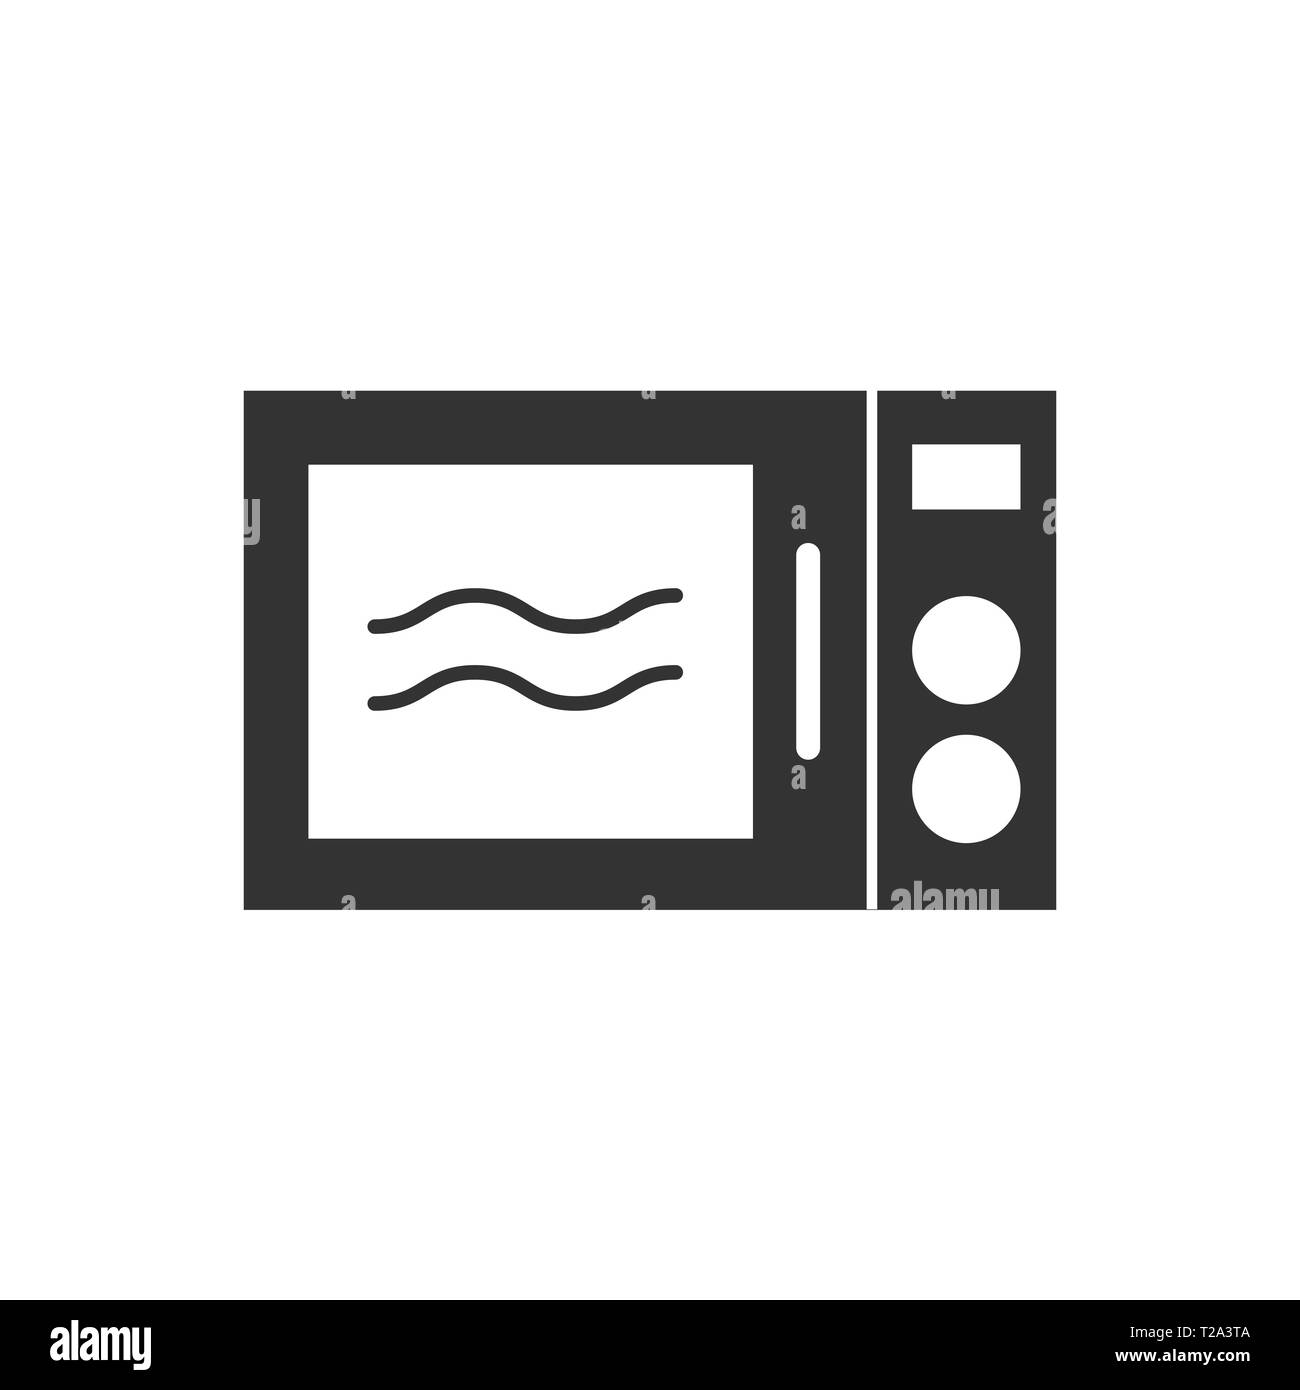 Vector illustration, flat design. Home appliance, kitchen microwave icon Stock Vector